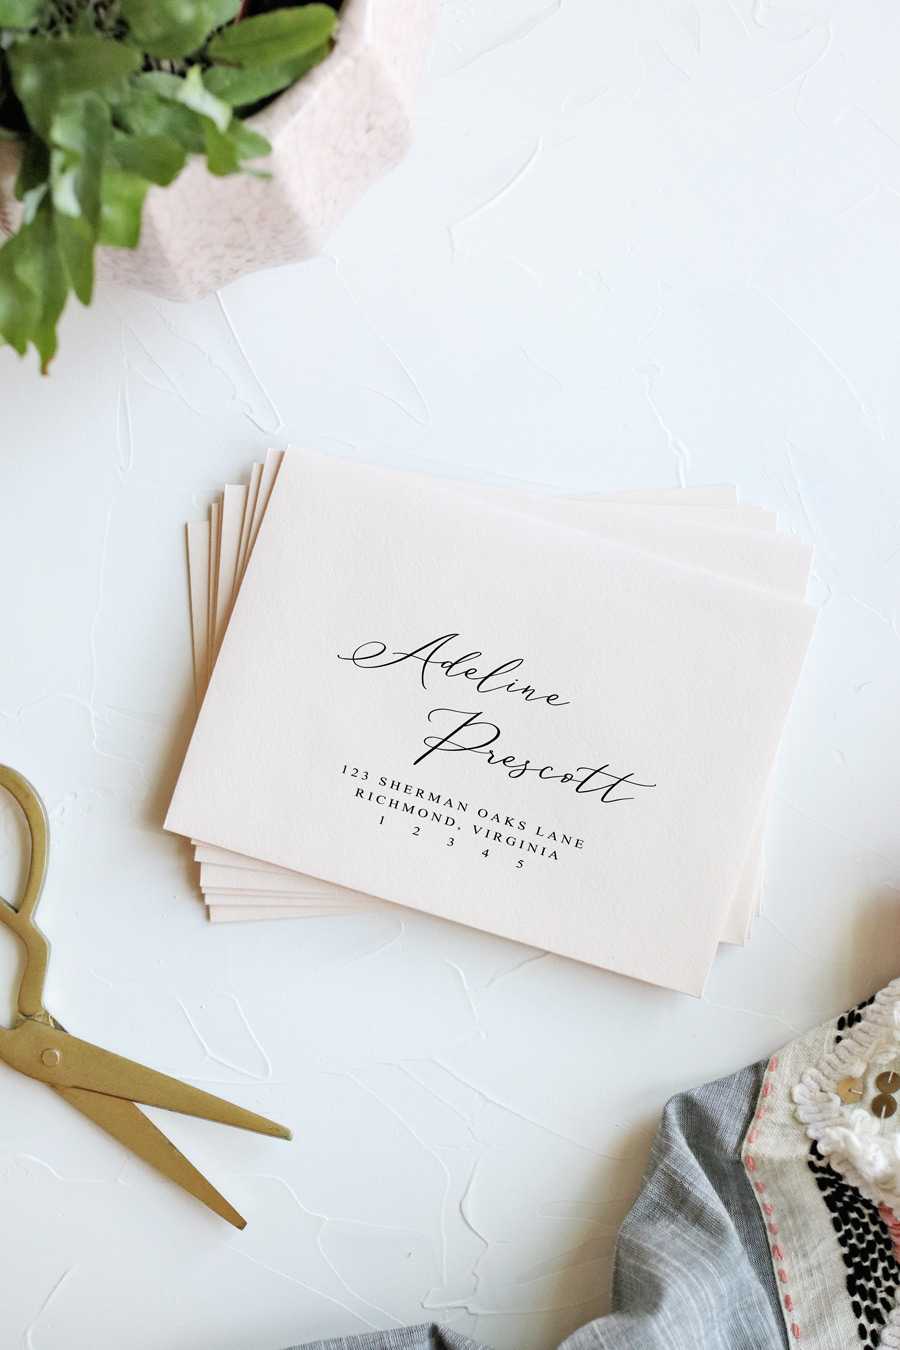 How To Print Envelopes The Easy Way | Pipkin Paper Company In Paper Source Templates Place Cards